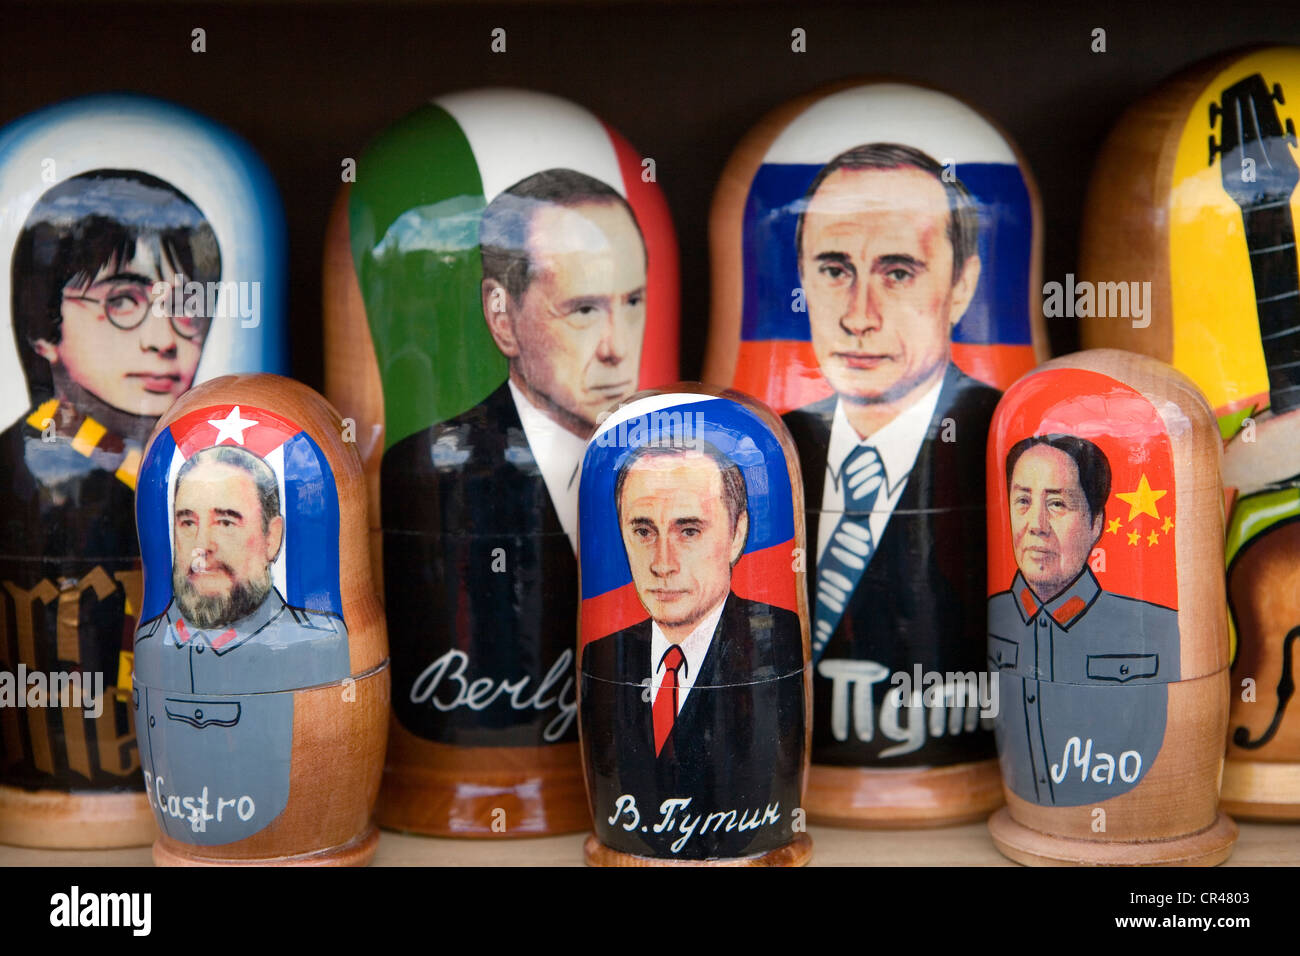 Russia, St Petersbourg, Russian nested dolls (matriochkas) decorated with chiefs of states' faces Stock Photo